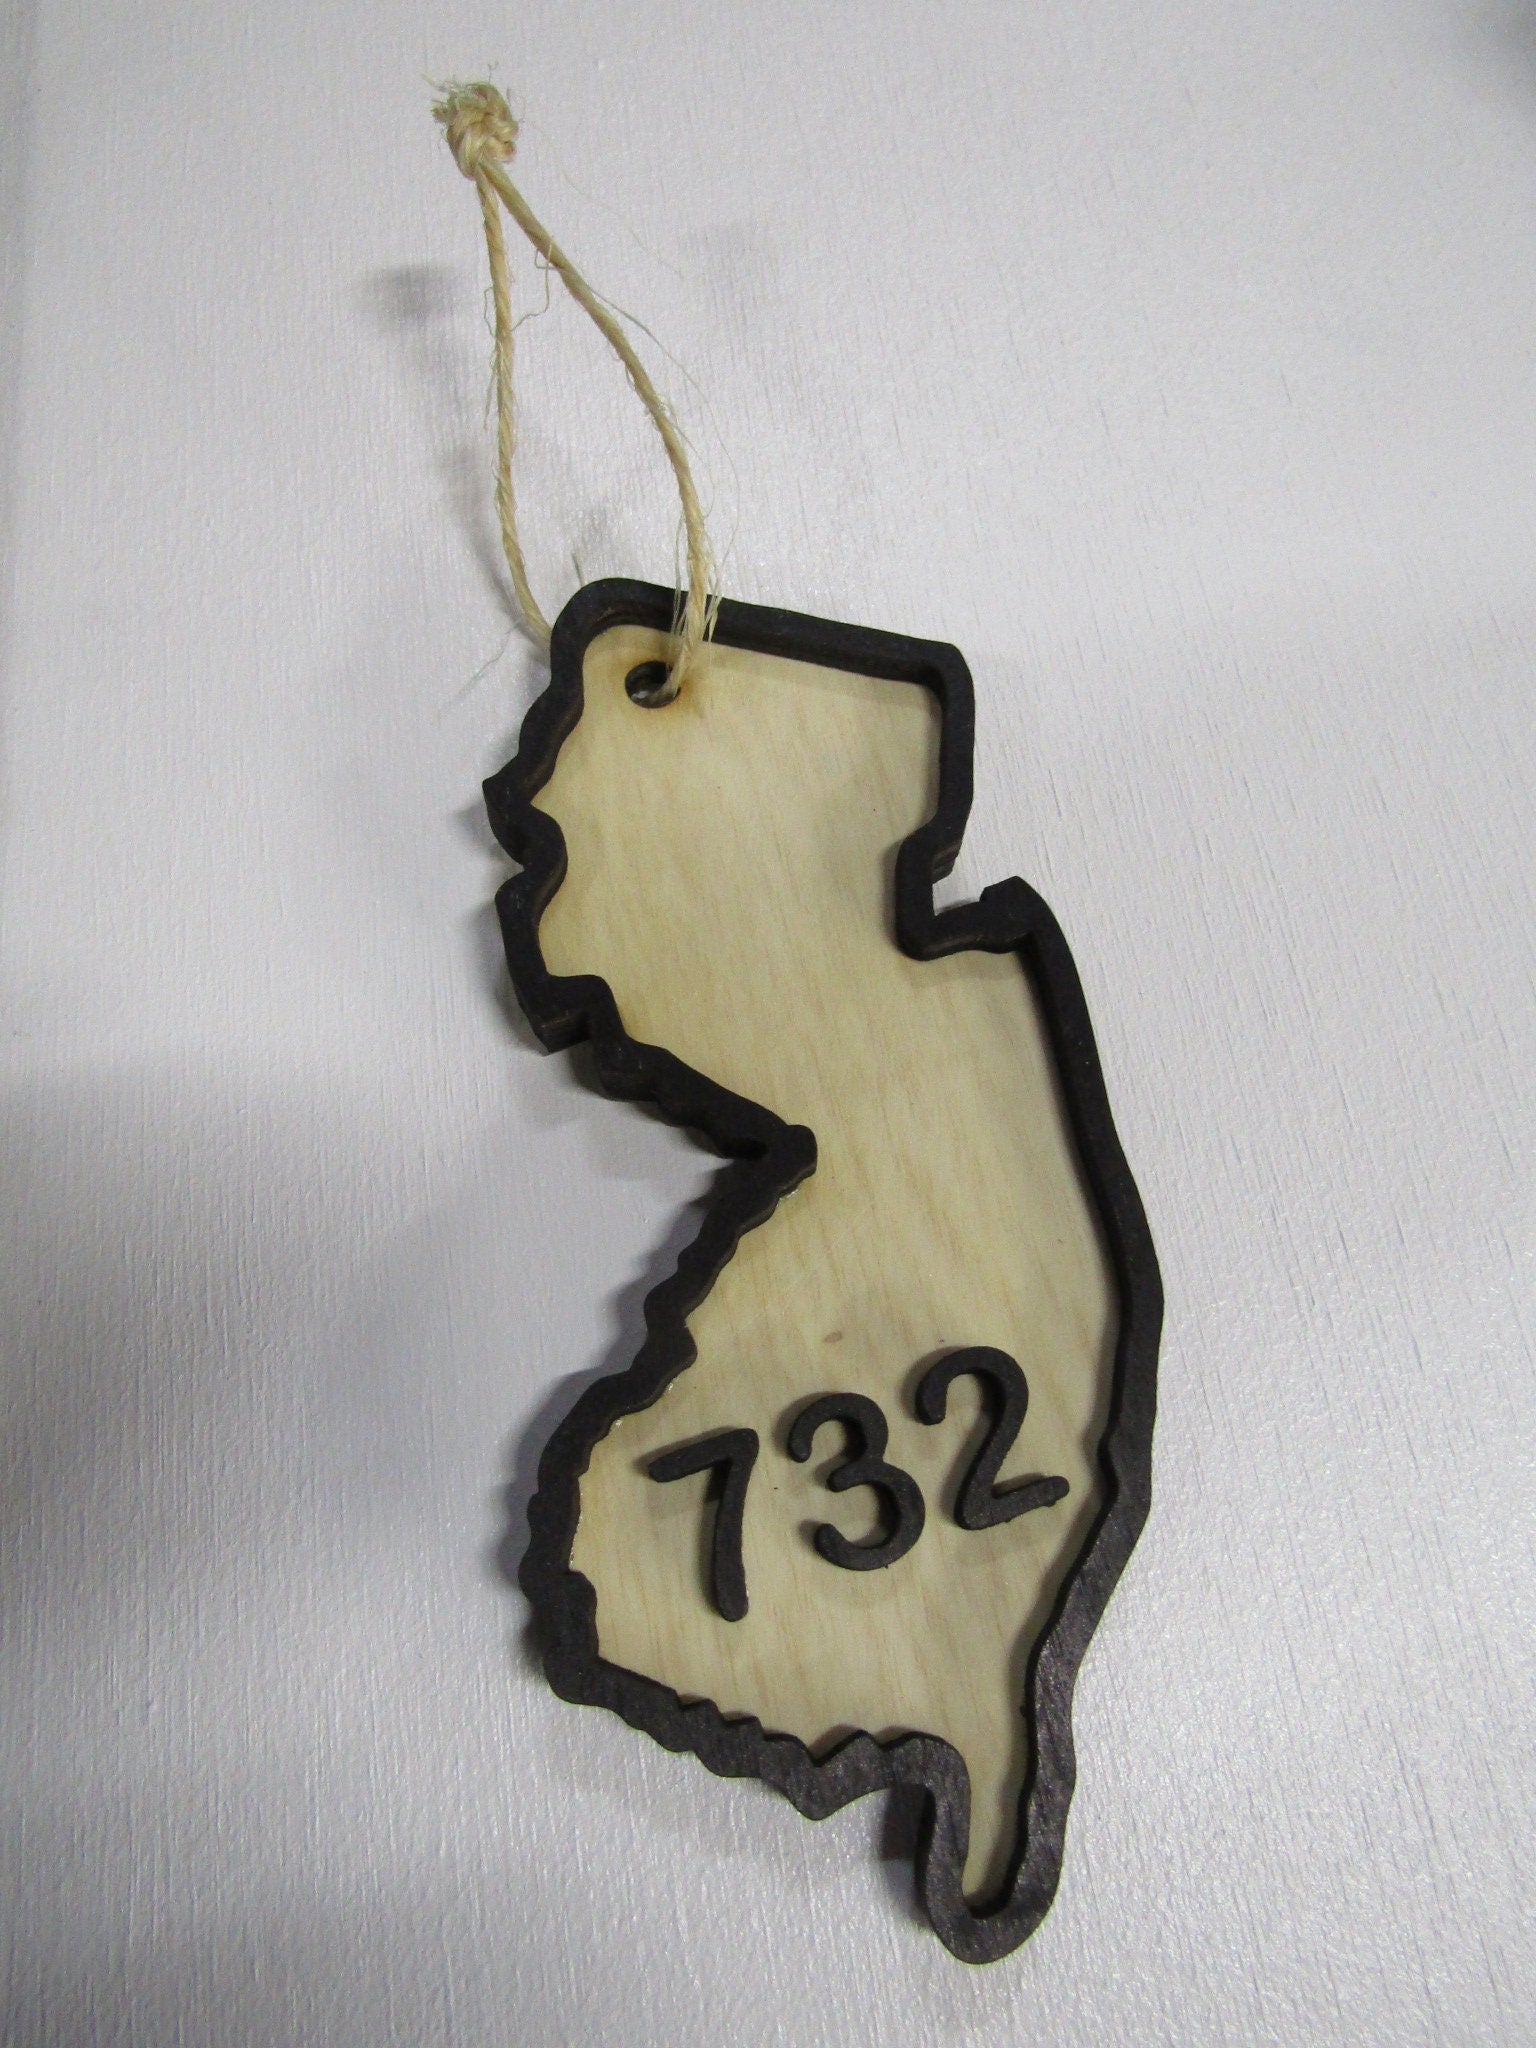 Custom State Raised Area Code Raised Sign New Jersey 732 3D Wood Your Words Custom Wooden Words Laser Cut Out Wood Cut Out Home Couples